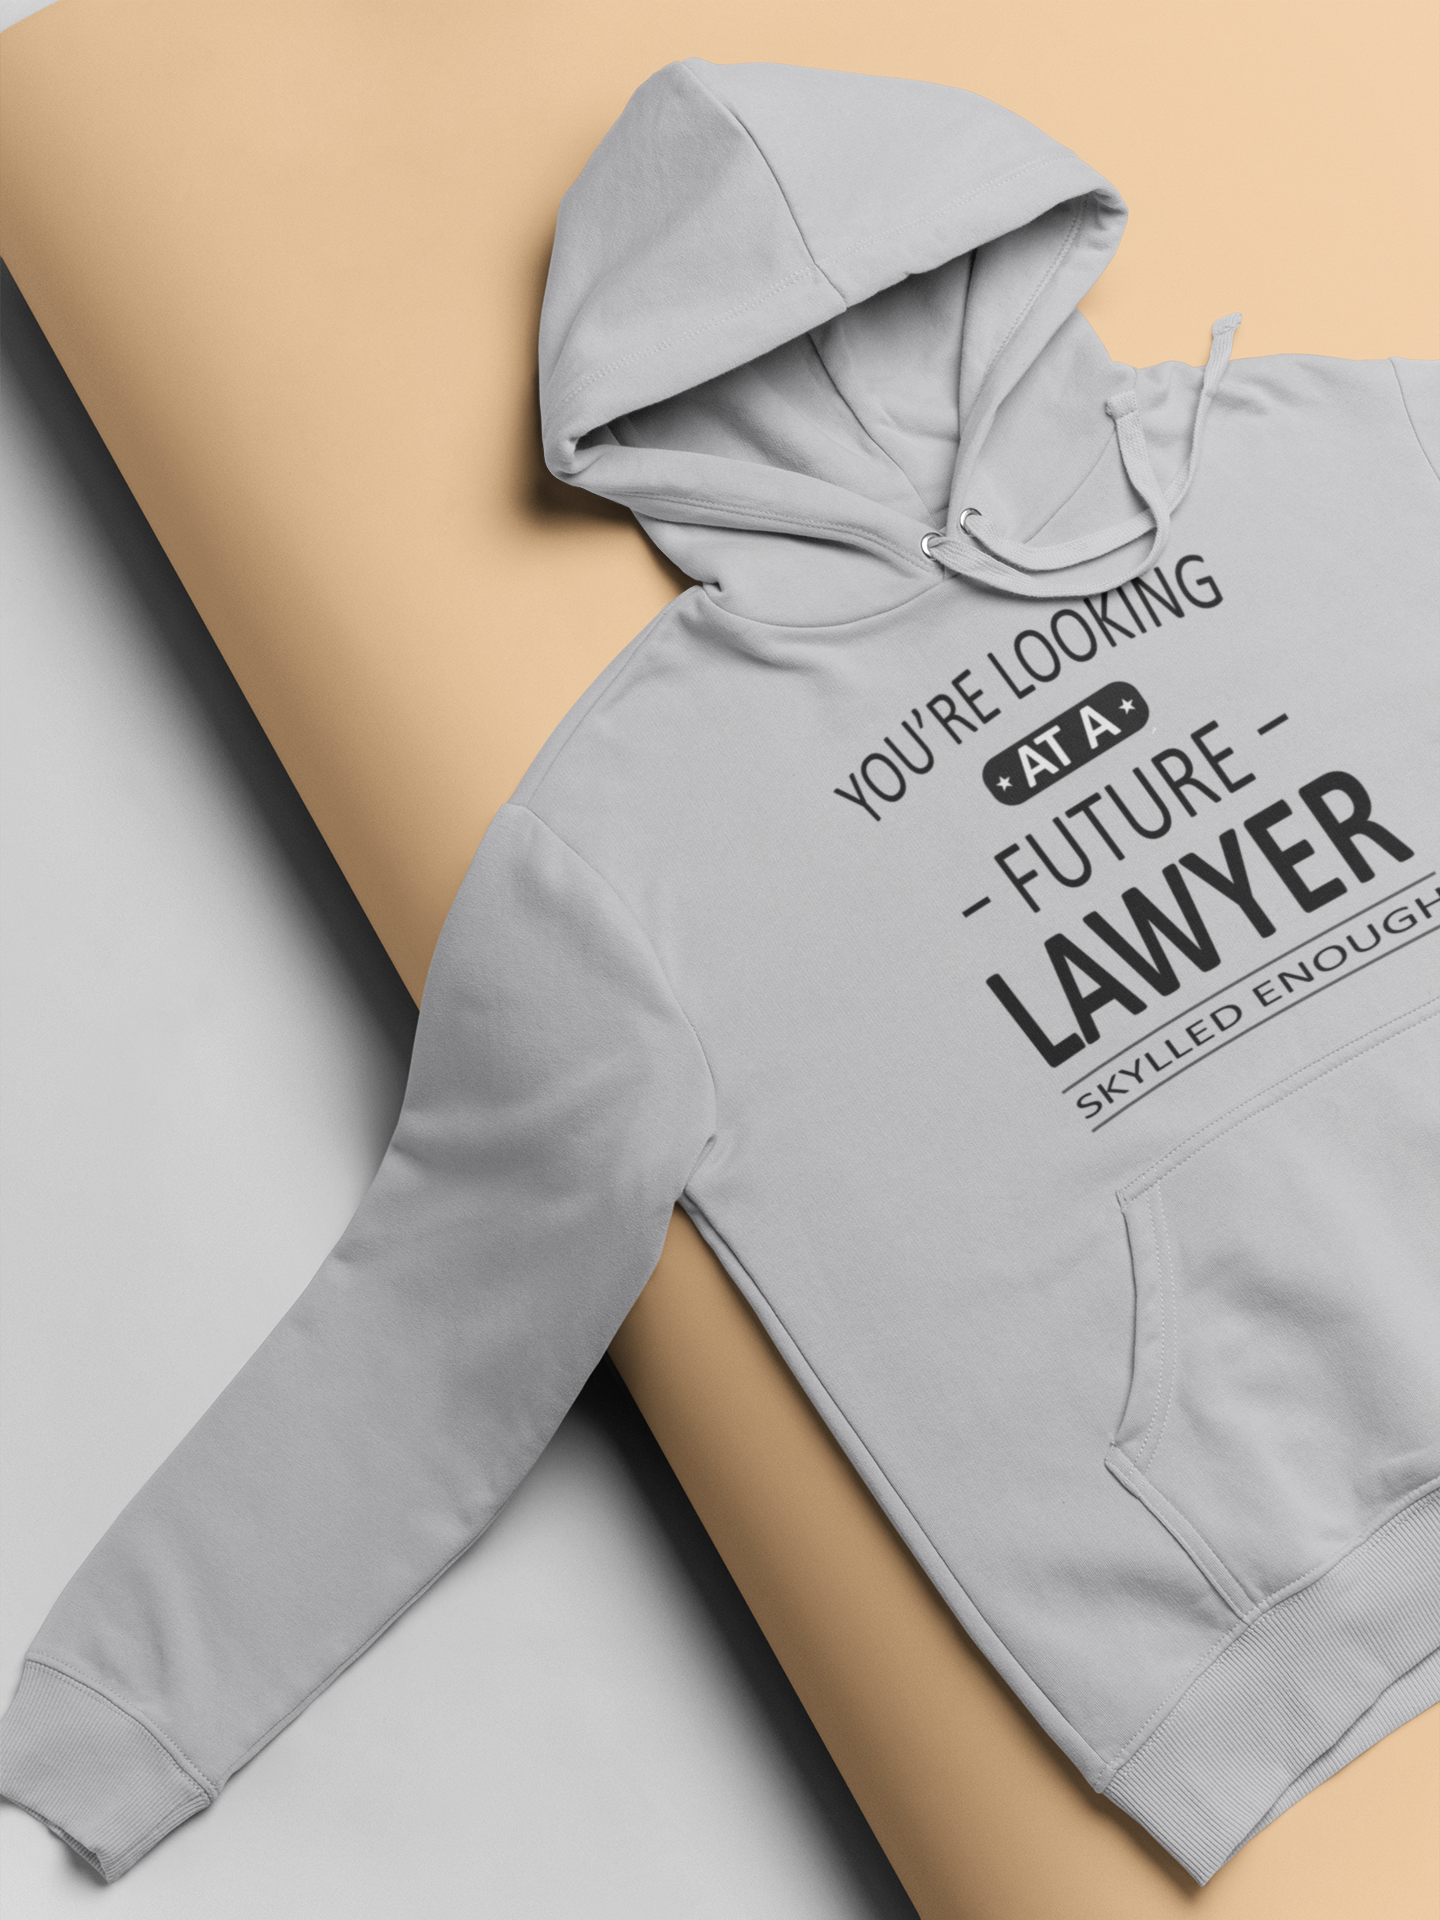 You Are Looking At A Future Lawyer Hoodies for Women-FunkyTeesClub